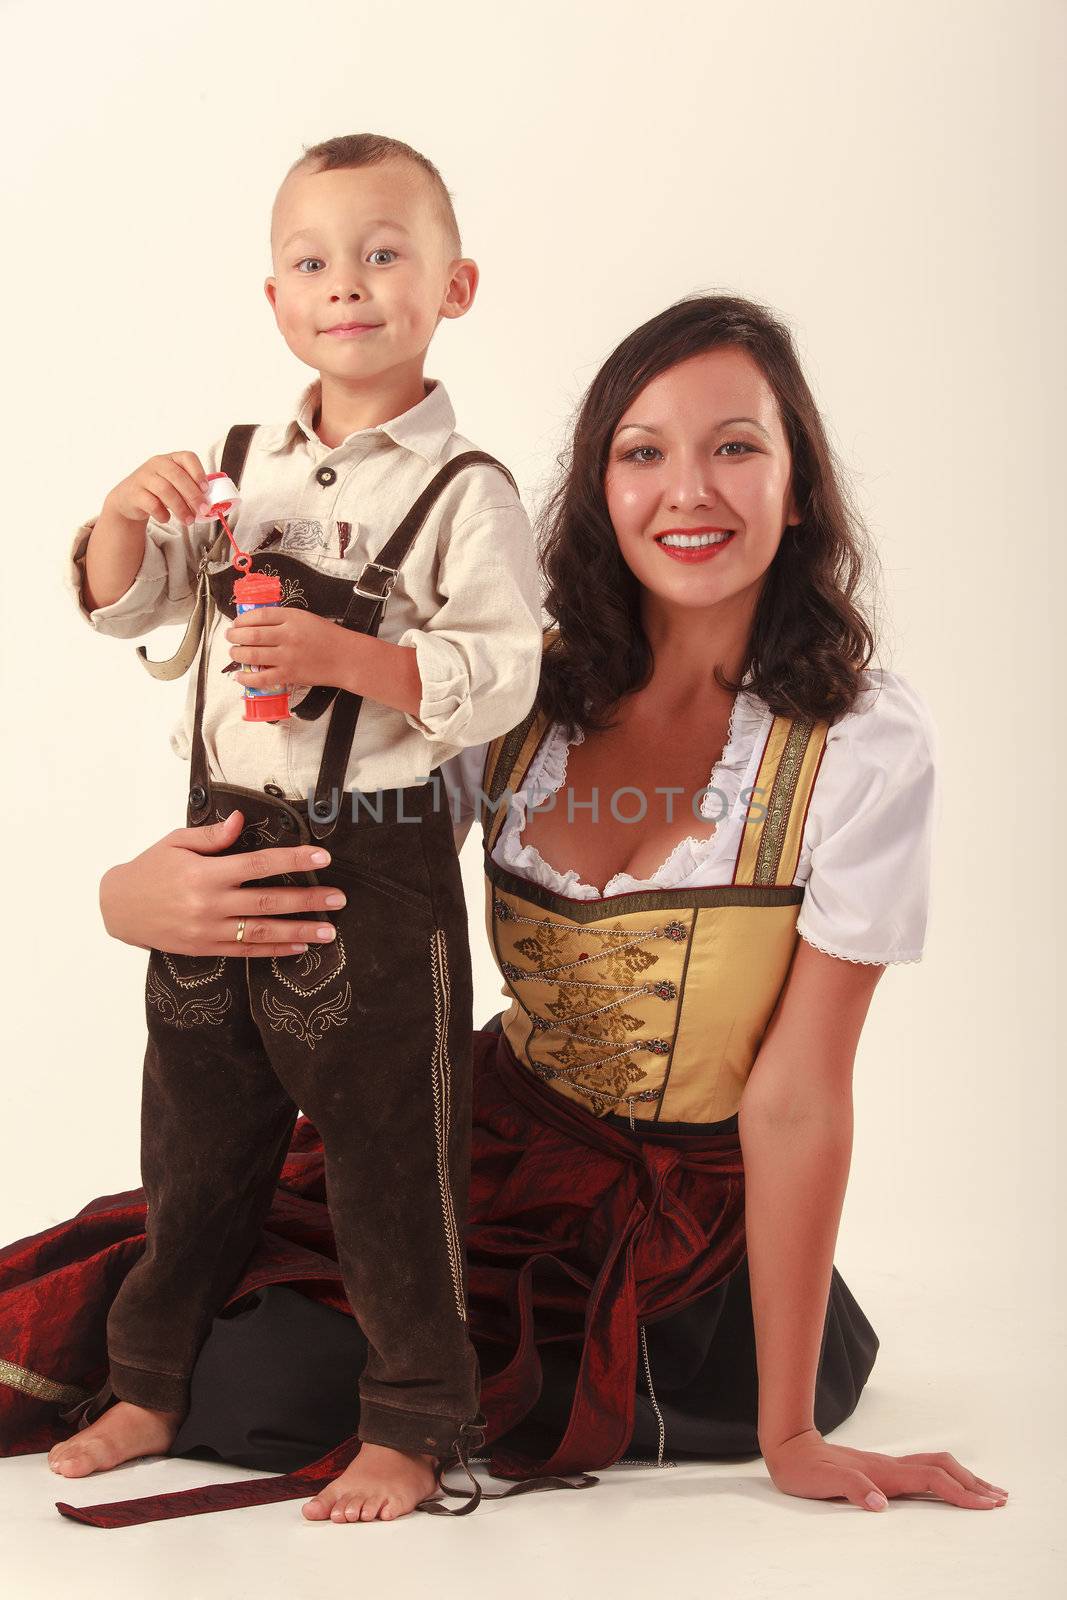 Single mother with her son in Bavarian costume